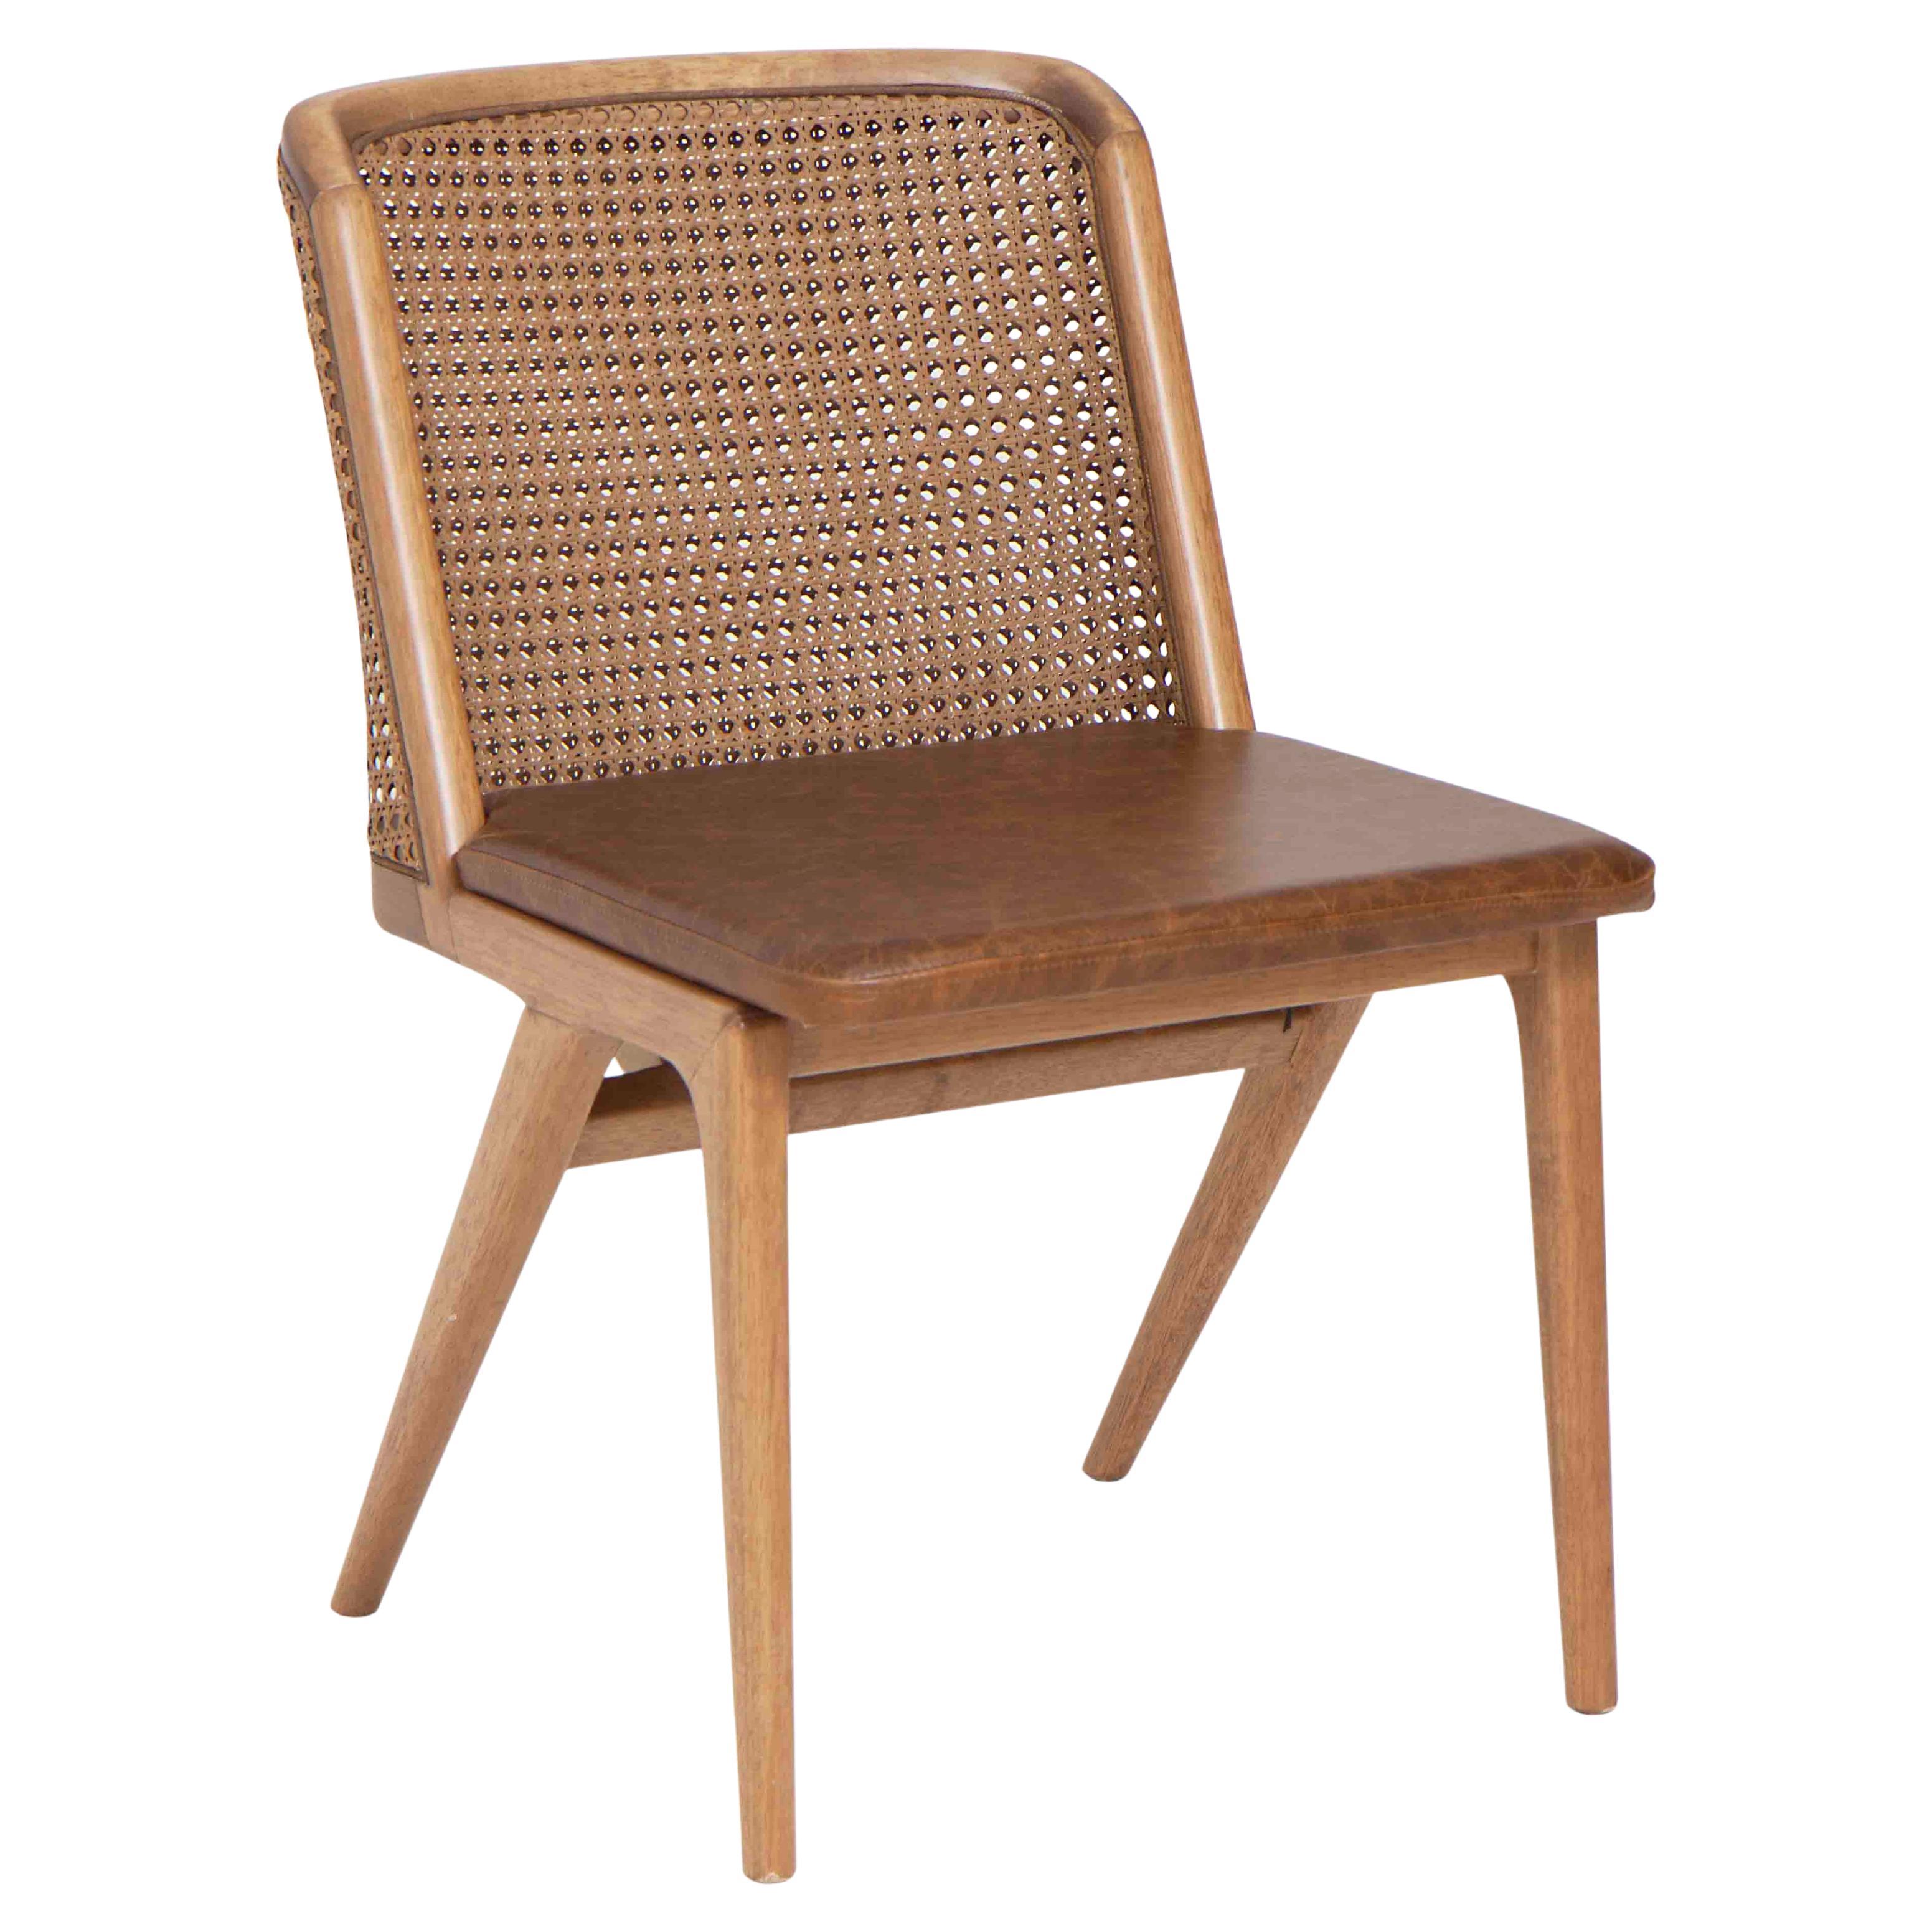 Leather Caramel Straw Backseat Wood Catuaba Rhea Dining Chair in Stock